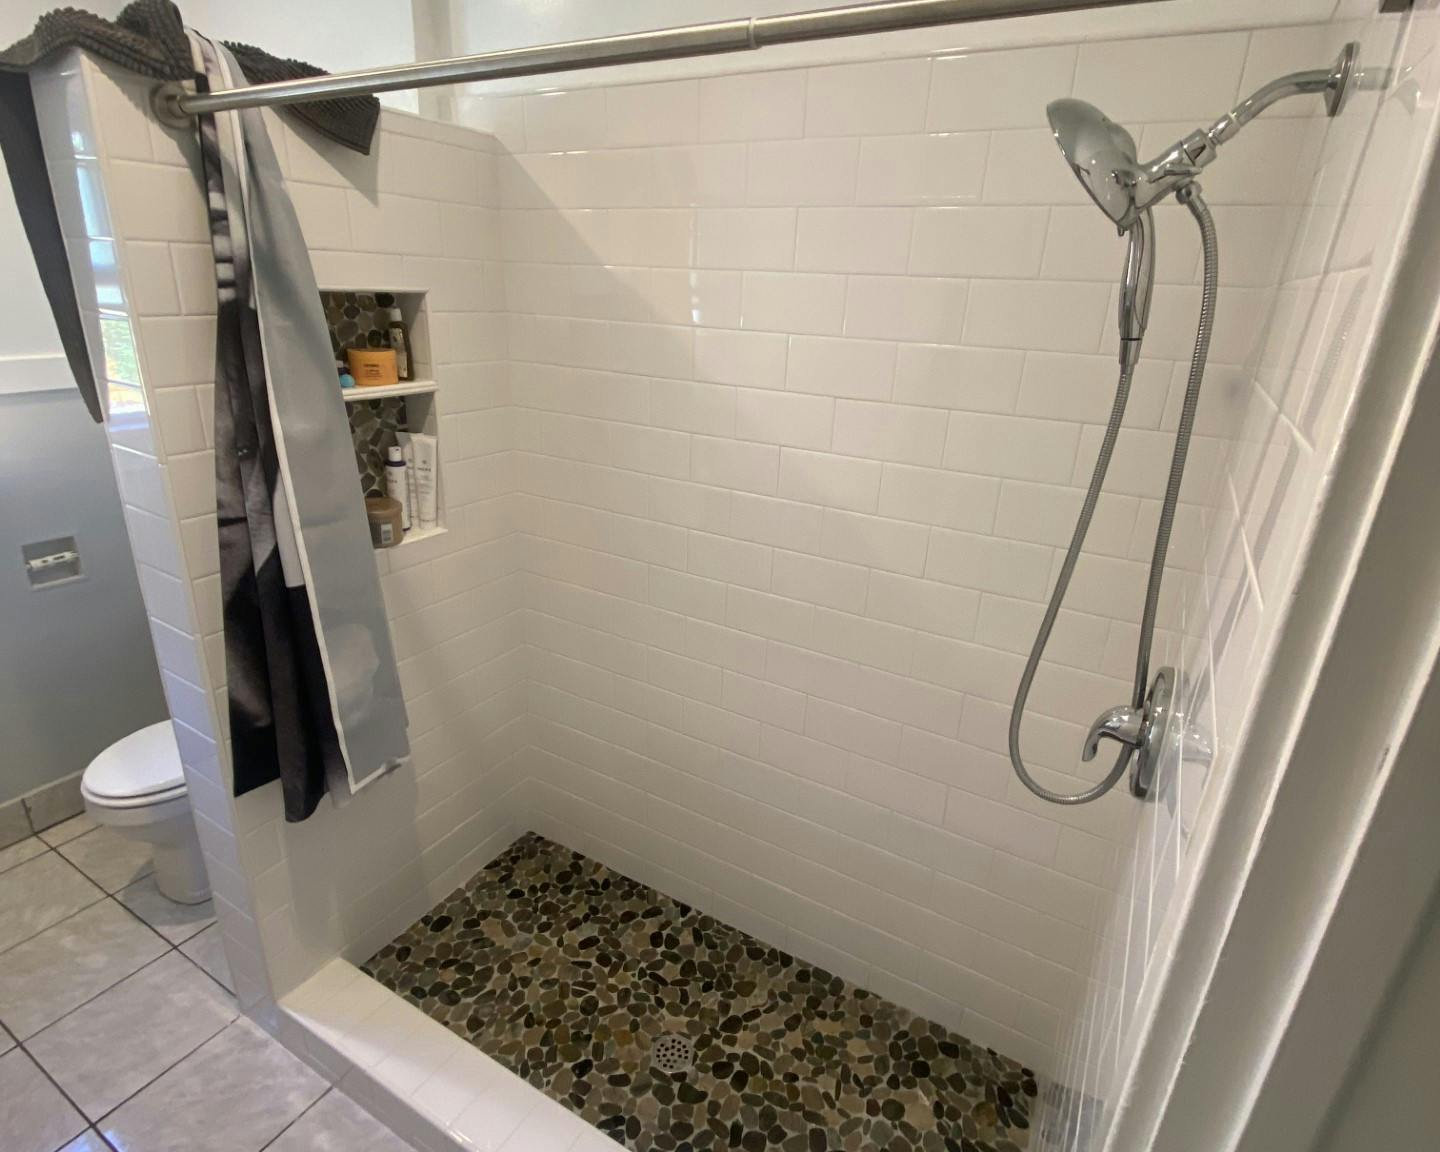 A well-lit bathroom with a walk-in shower showcasing white horizontal tiling on the walls and a pebble stone floor. A stainless steel handheld showerhead hangs from the right side. The left shows a dark draped shower curtain, a glimpse of a white toilet, and a wooden shelving unit holding toiletries. A window provides natural light at the top left corner.